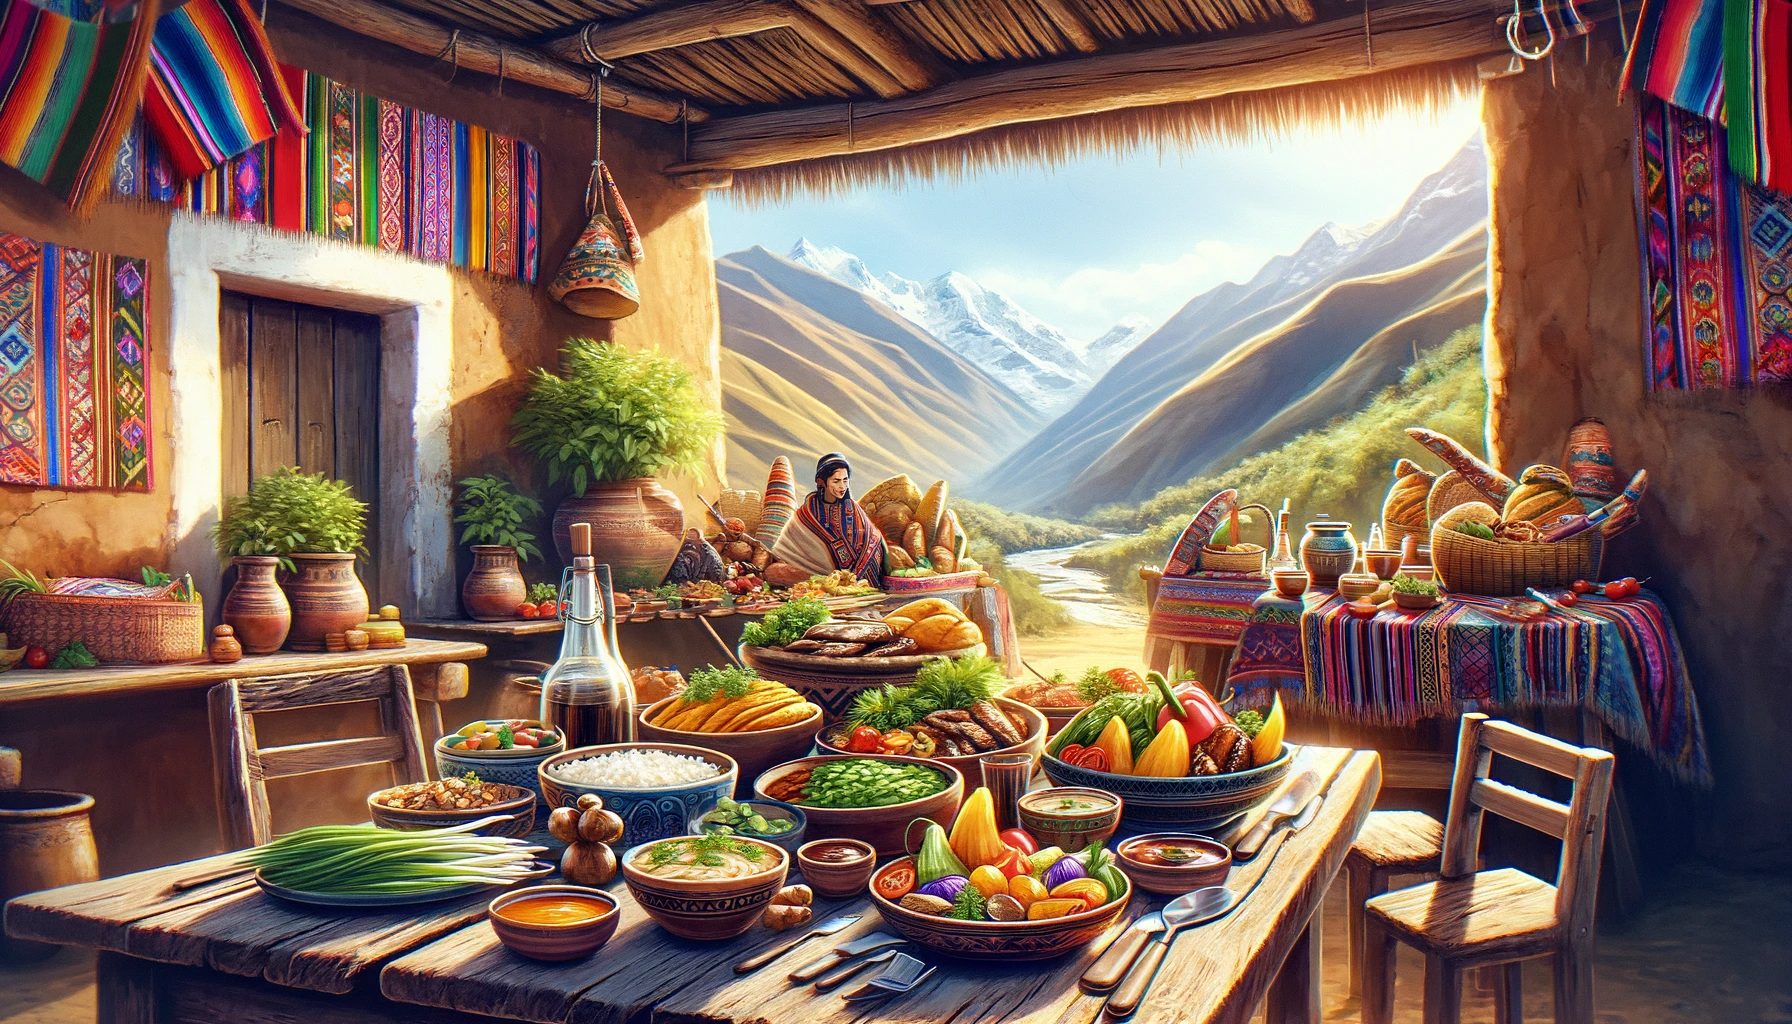 Andean village market with traditional food and textiles.